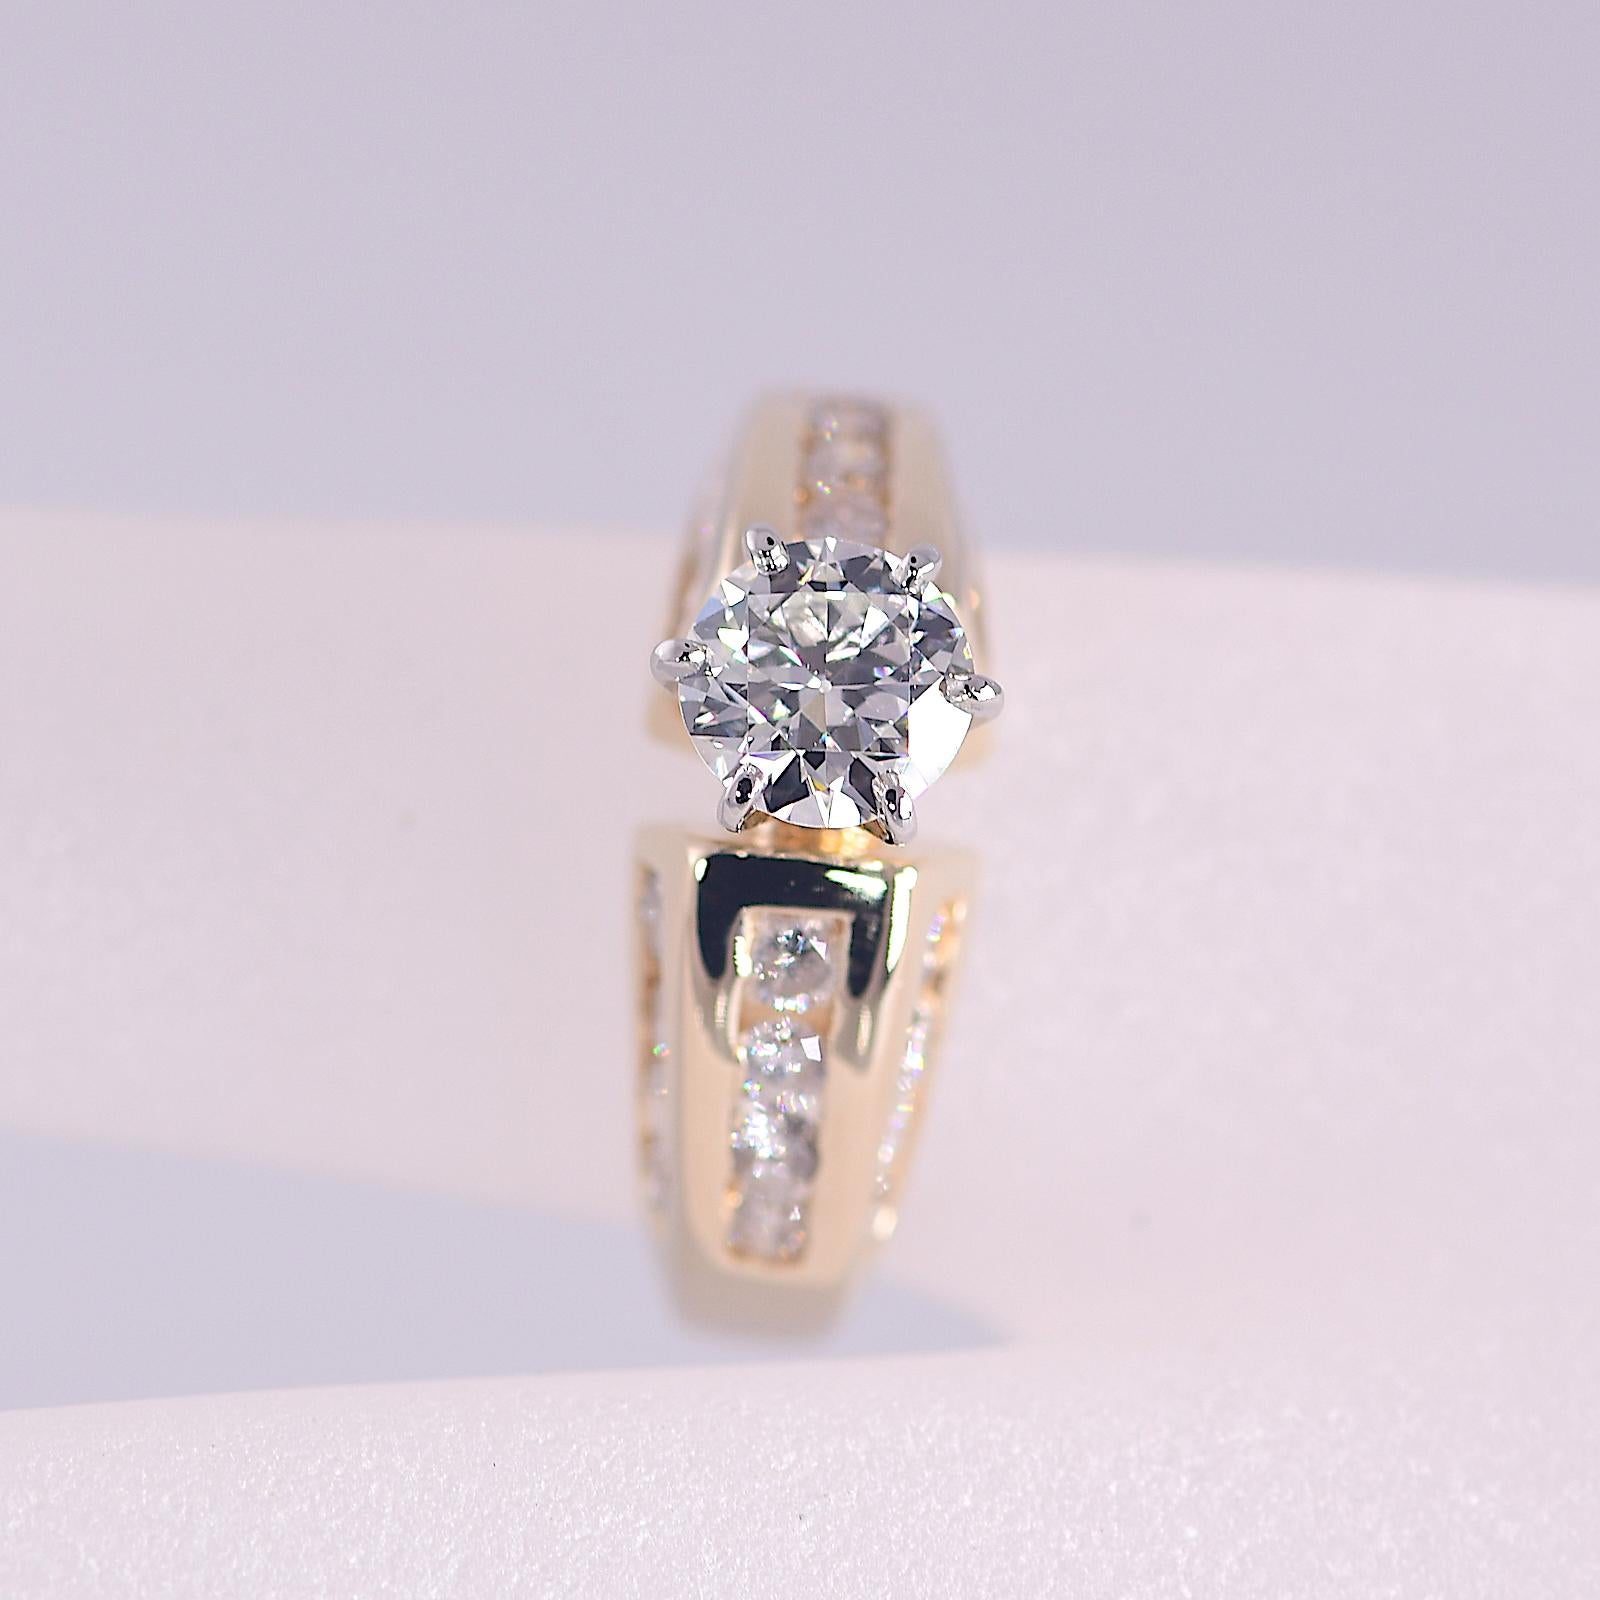 2 TCW with 1 Carat Center Natural Diamond Engagement Ring Yellow Gold 14K

Stones: Natural Diamonds TCW: 2
  Center:   Carat:  1   Color: I   Clarity: VS1   Cut: Round
  Side Stones:   Carat:  1   Color: HIJ   Clarity: I2-I3   Cut: Round
Metal: